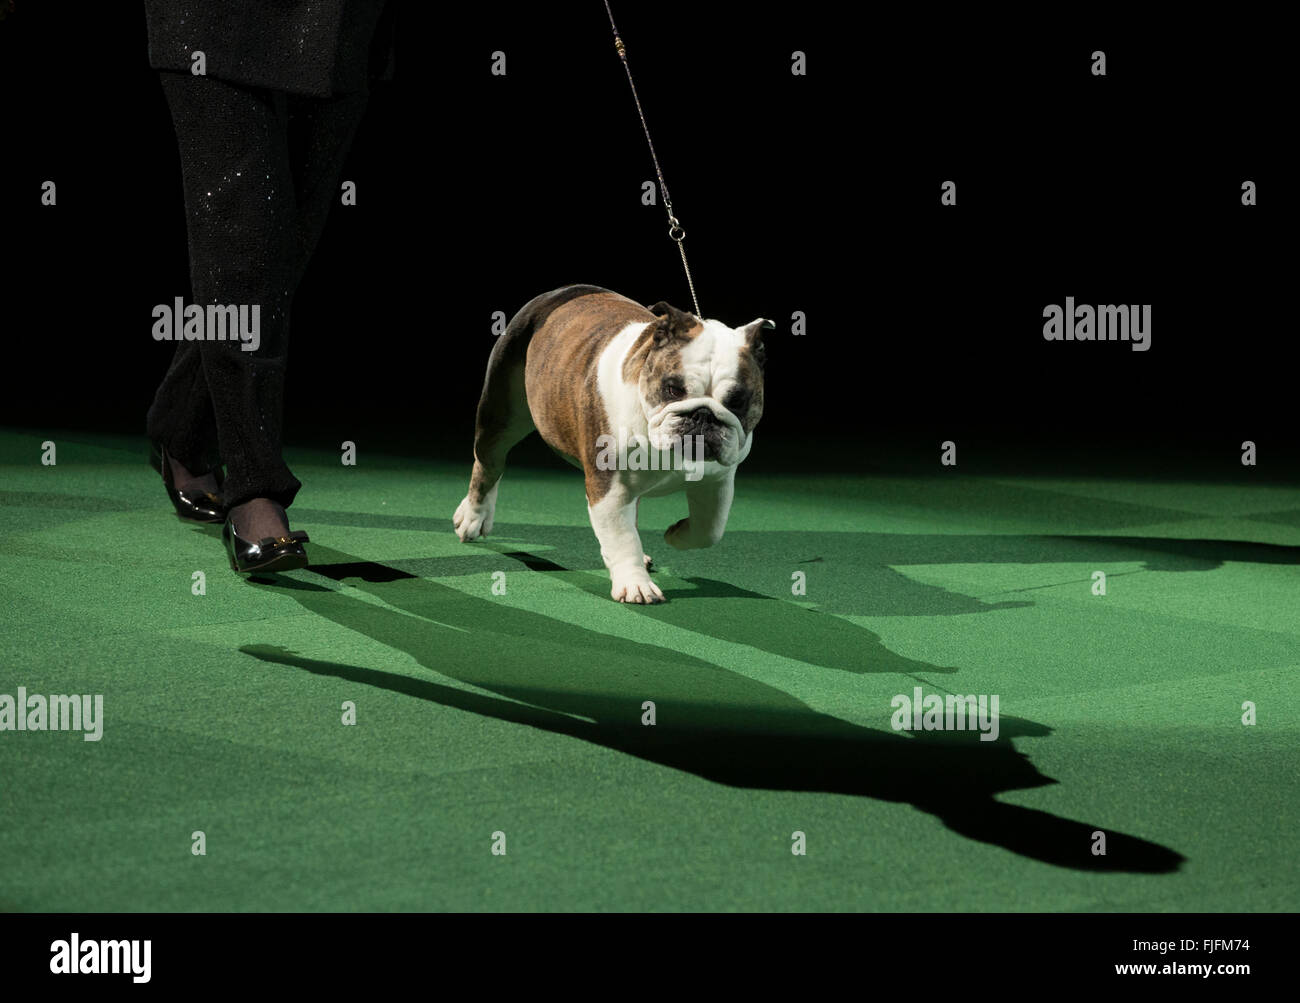 New York, NY - February 16, 2016: Best of non-sporting group bulldog runs at 140 Westminster Kennel Club dog show at Madison Square Garden Stock Photo